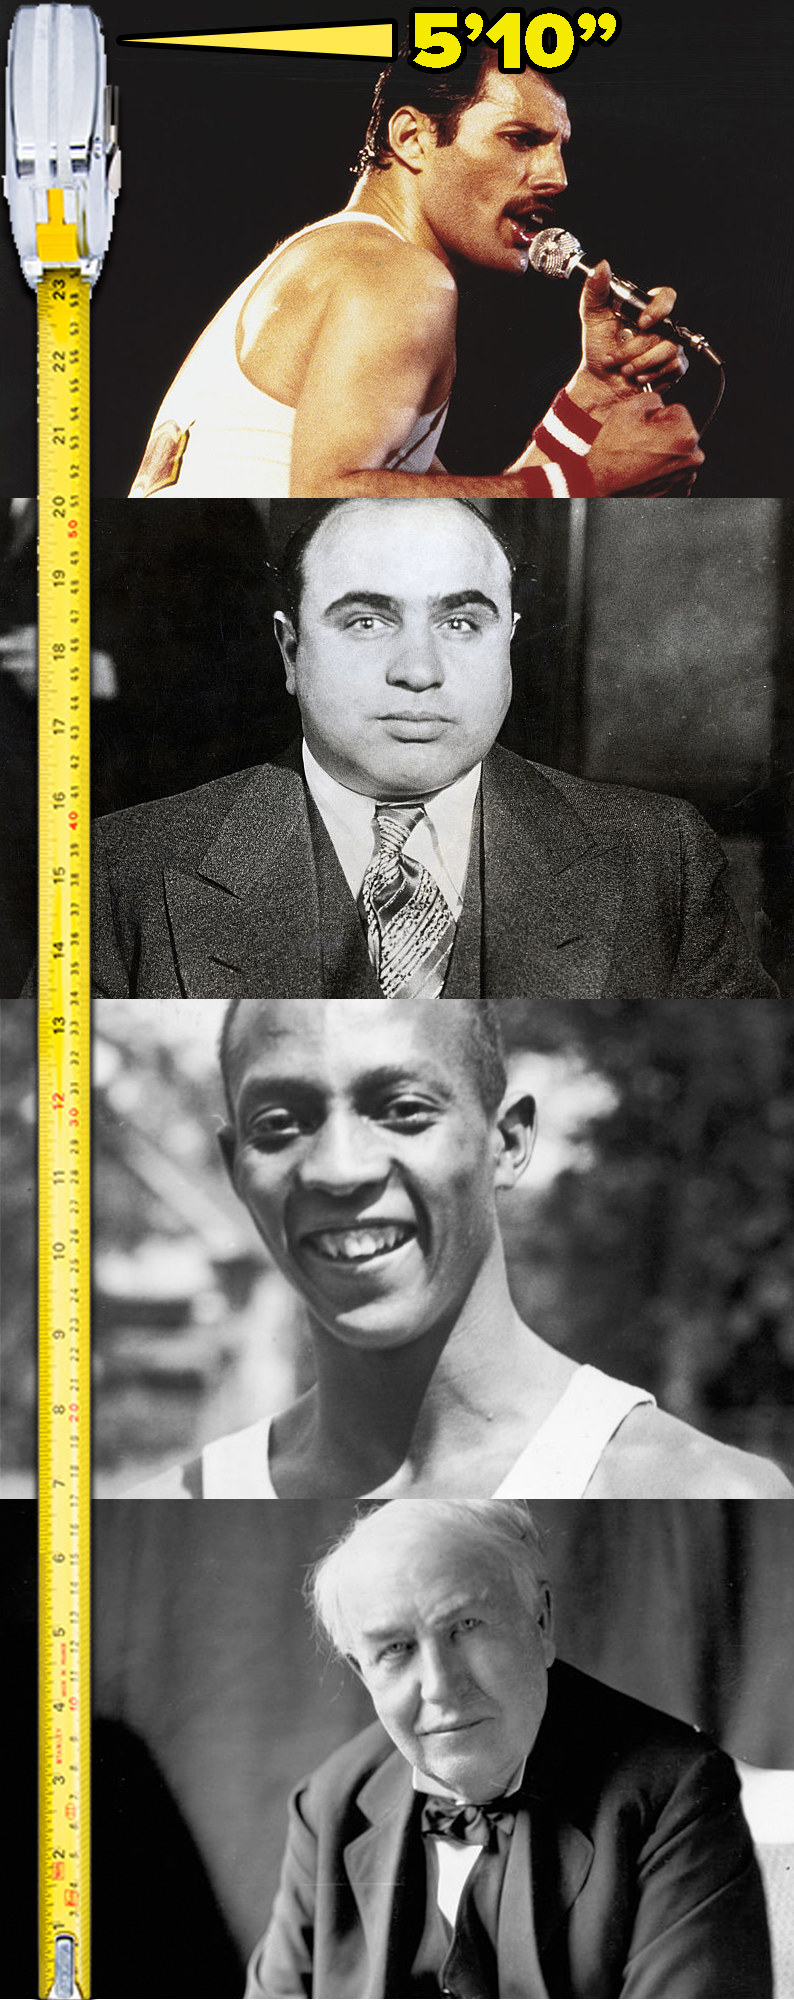 Stacked images of Freddie Mercury, Al Capone, Jesse Owens, and Thomas Edison next to a measuring tape